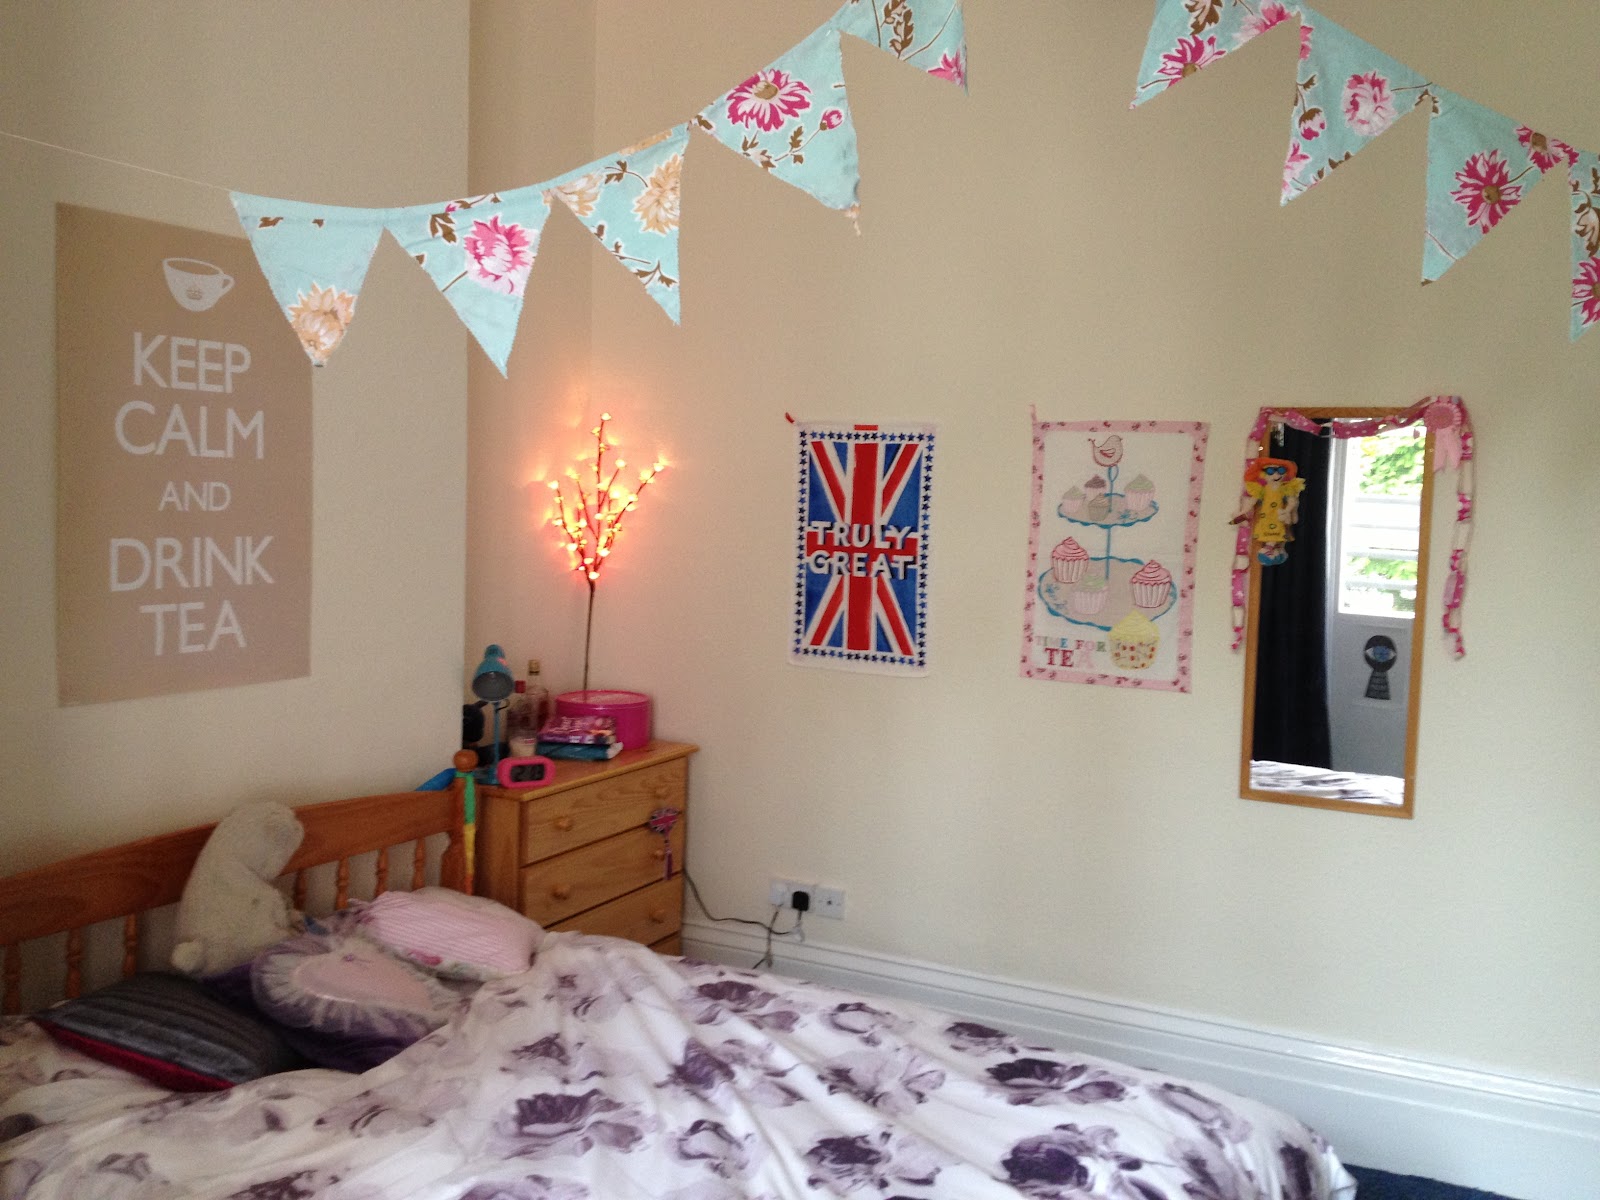 The twenty best ways to decorate your student room at uni 